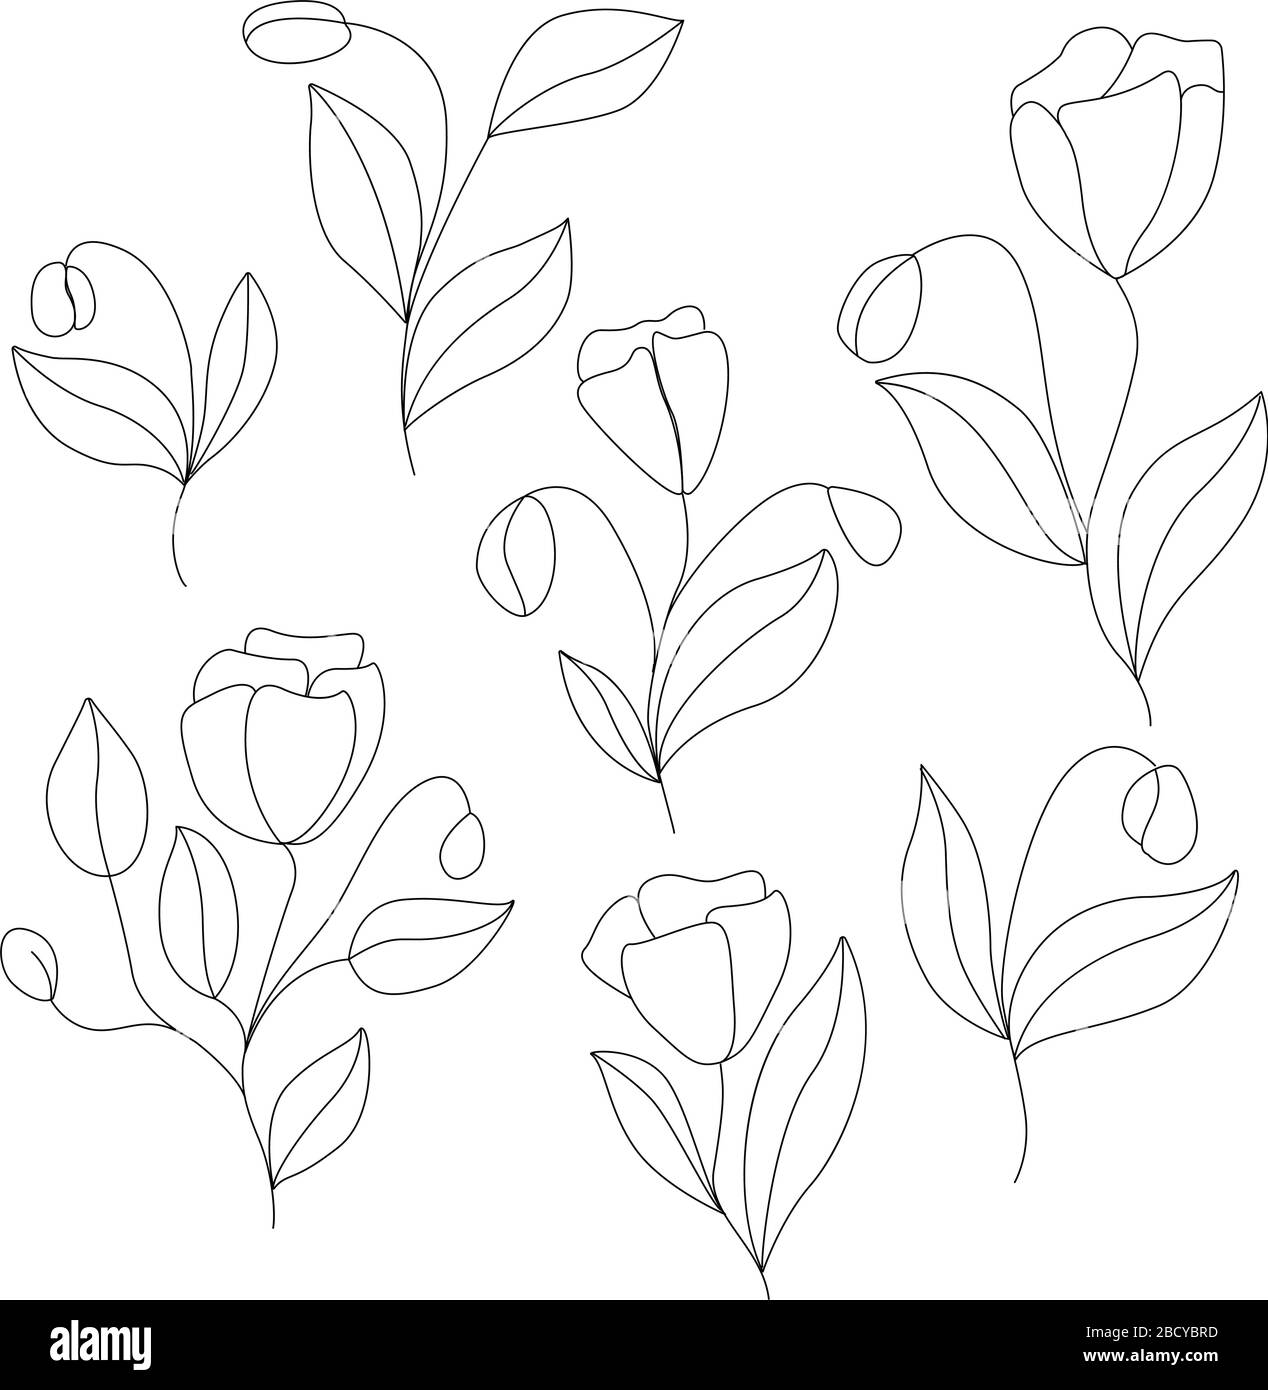 Linear Vector Drawing Of Simple Flowers On A White Background For The Design Of Wallpaper Wrapping Paper Textiles Bedding Pillows Tablecloths Stock Vector Image Art Alamy,Living Room Home Color Design Ideas